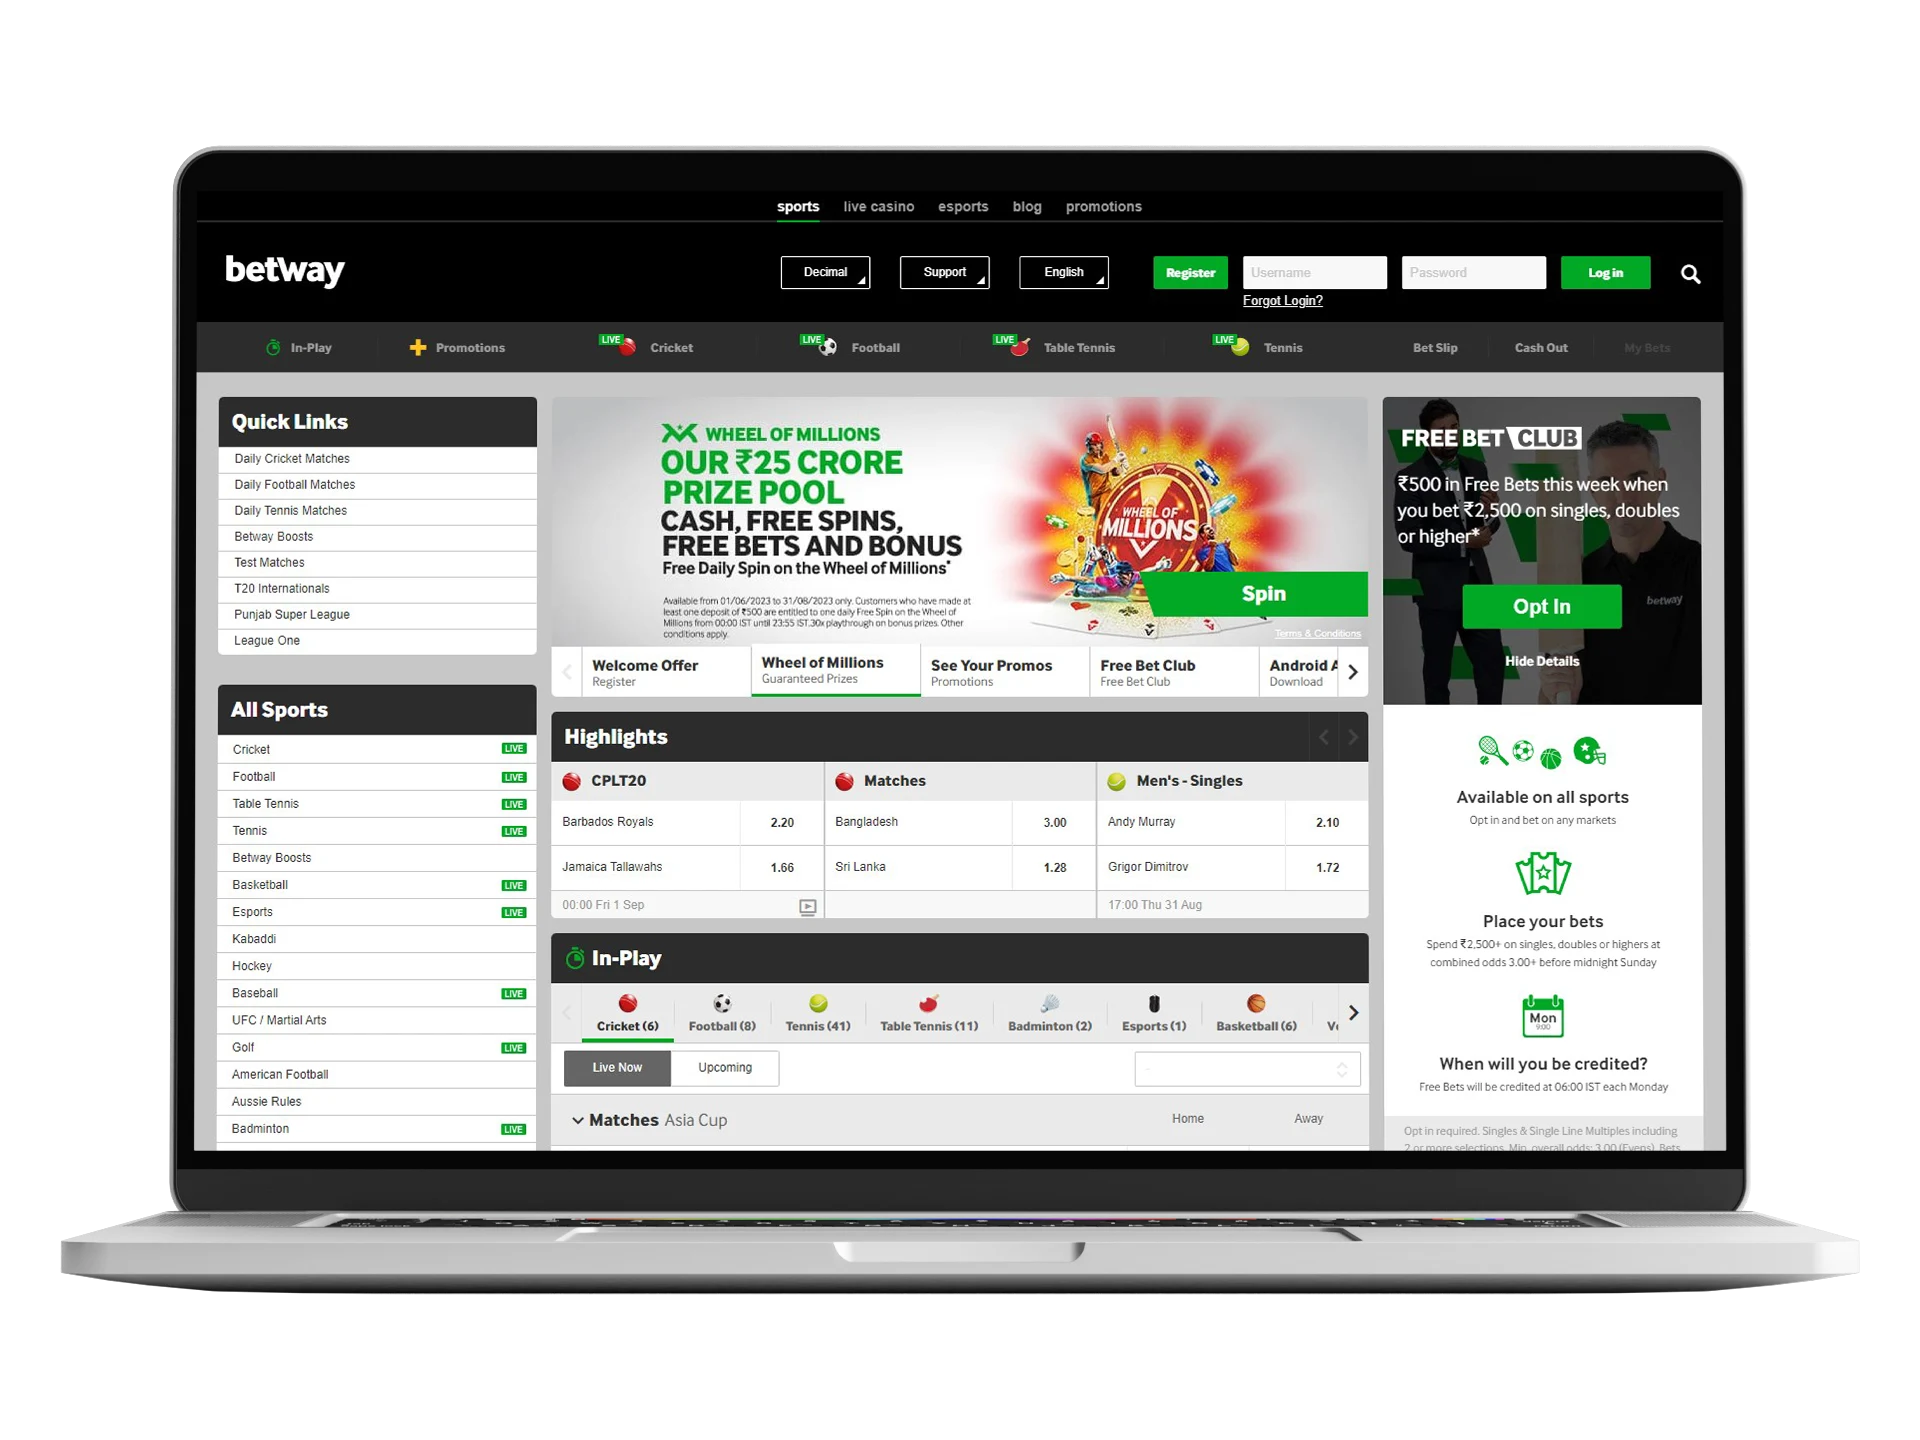 Betway provides an excellent betting environment and lots of benefits for its users.